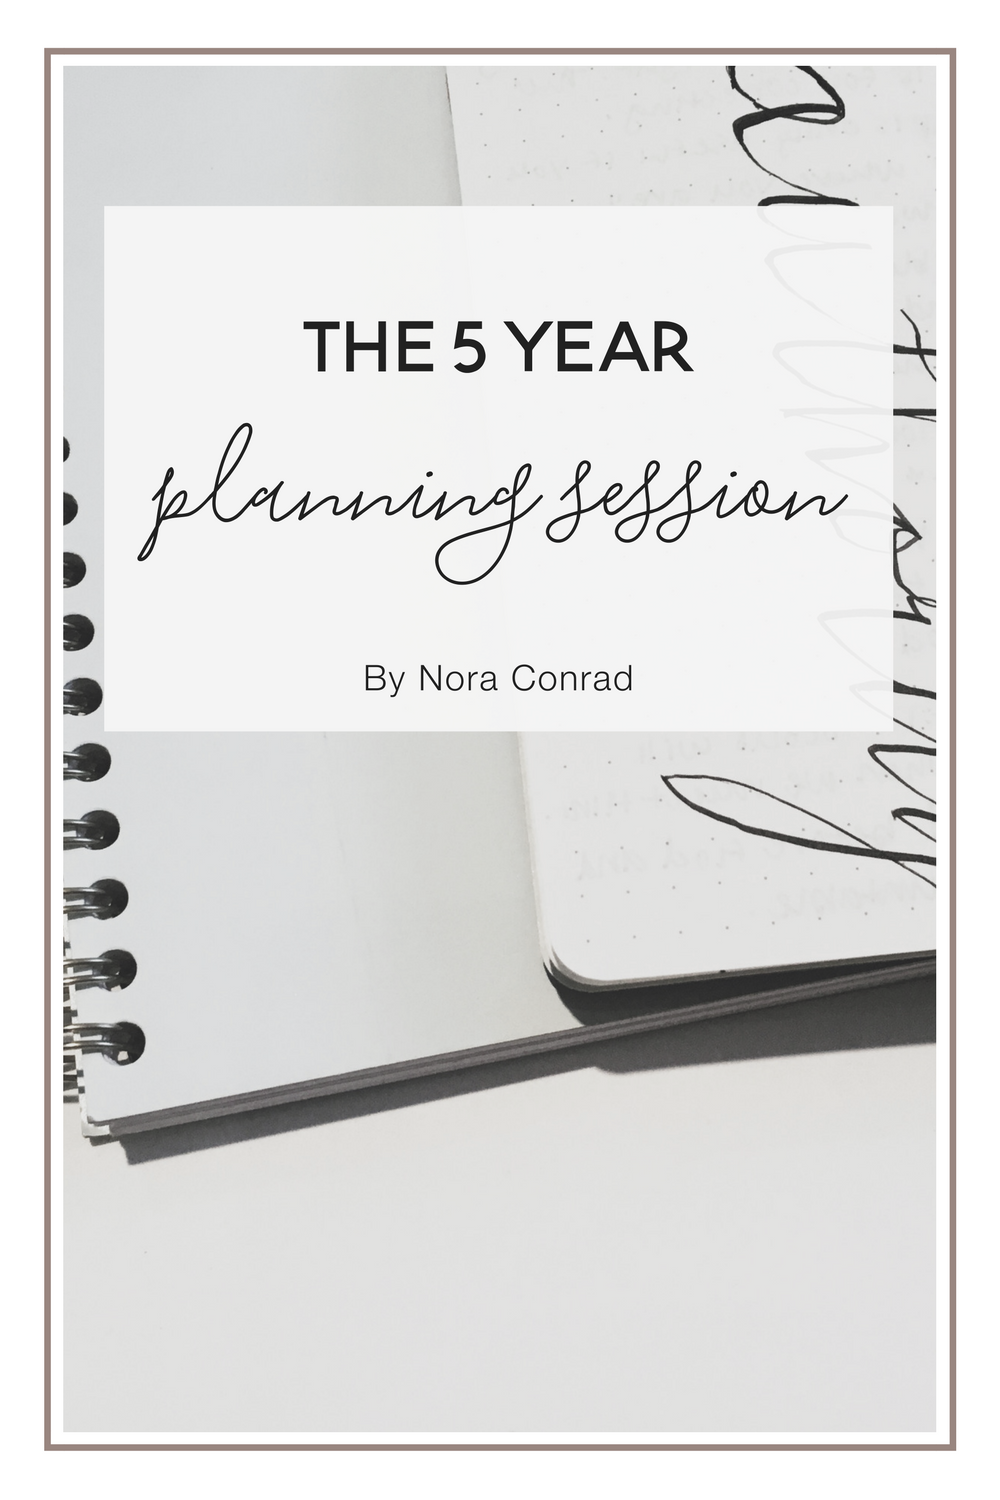 5 year plans seem silly right? Wrong. Let me explain why I think it's important to have a 5 year plan and how to make a good one!